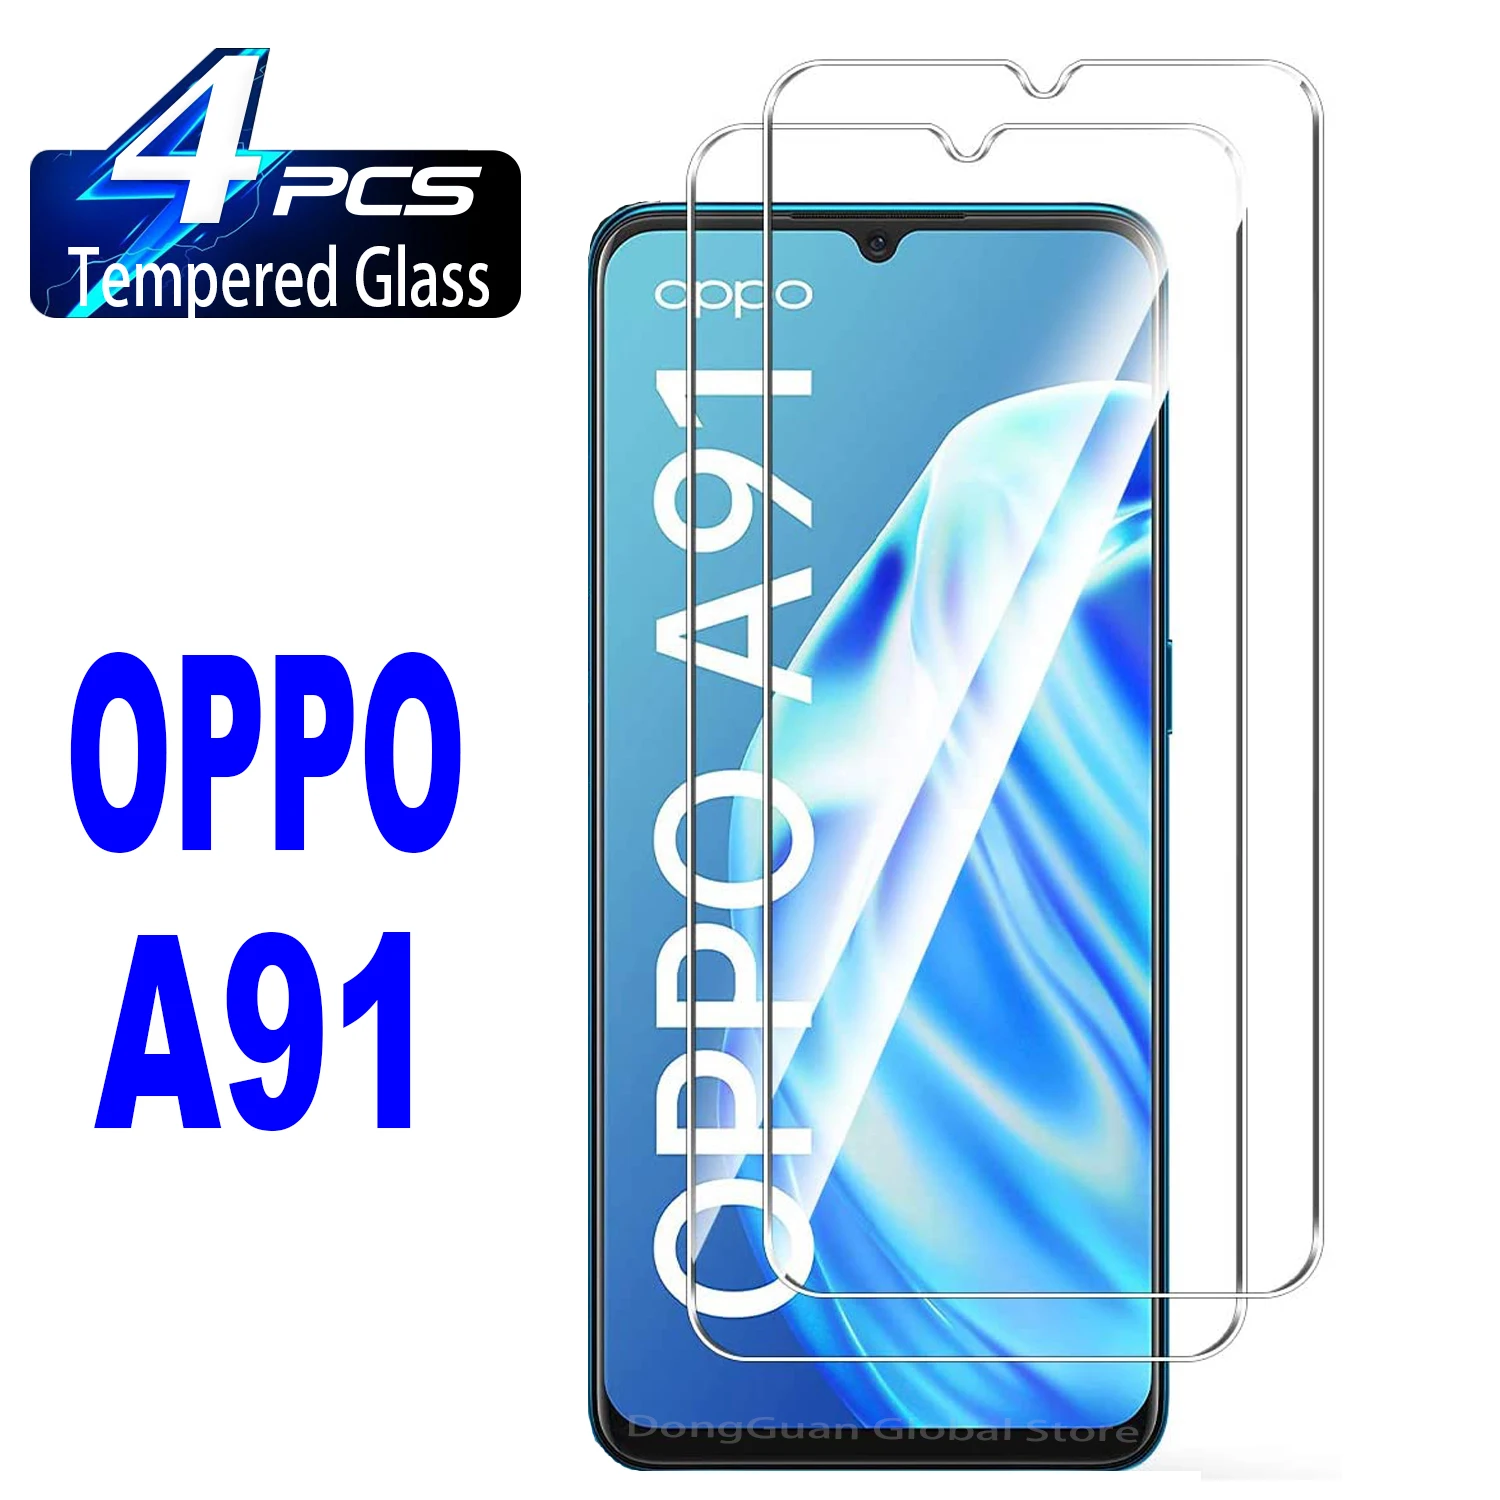 2/4Pcs Tempered Glass For OPPO A91 Screen Protector Glass Film 2 4pcs tempered glass for oneplus 9 9r 9rt screen protector glass film